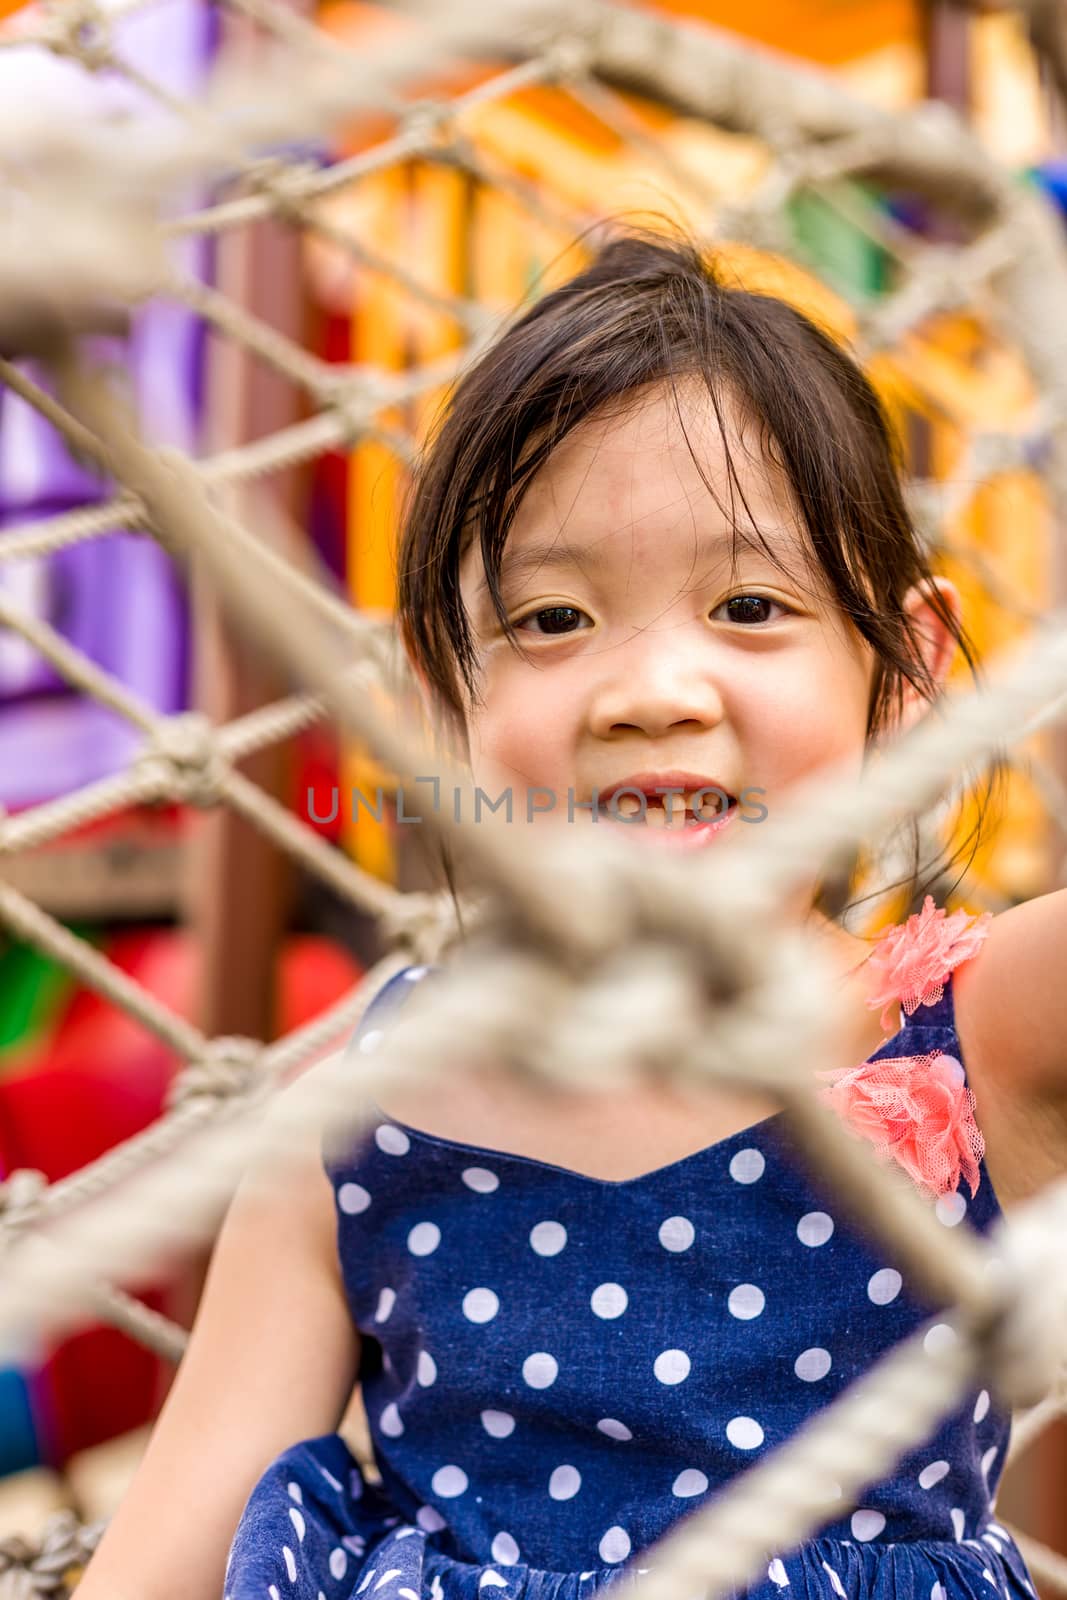 Kid Playing on Playground / Happy Kid Playing on Playground by supparsorn